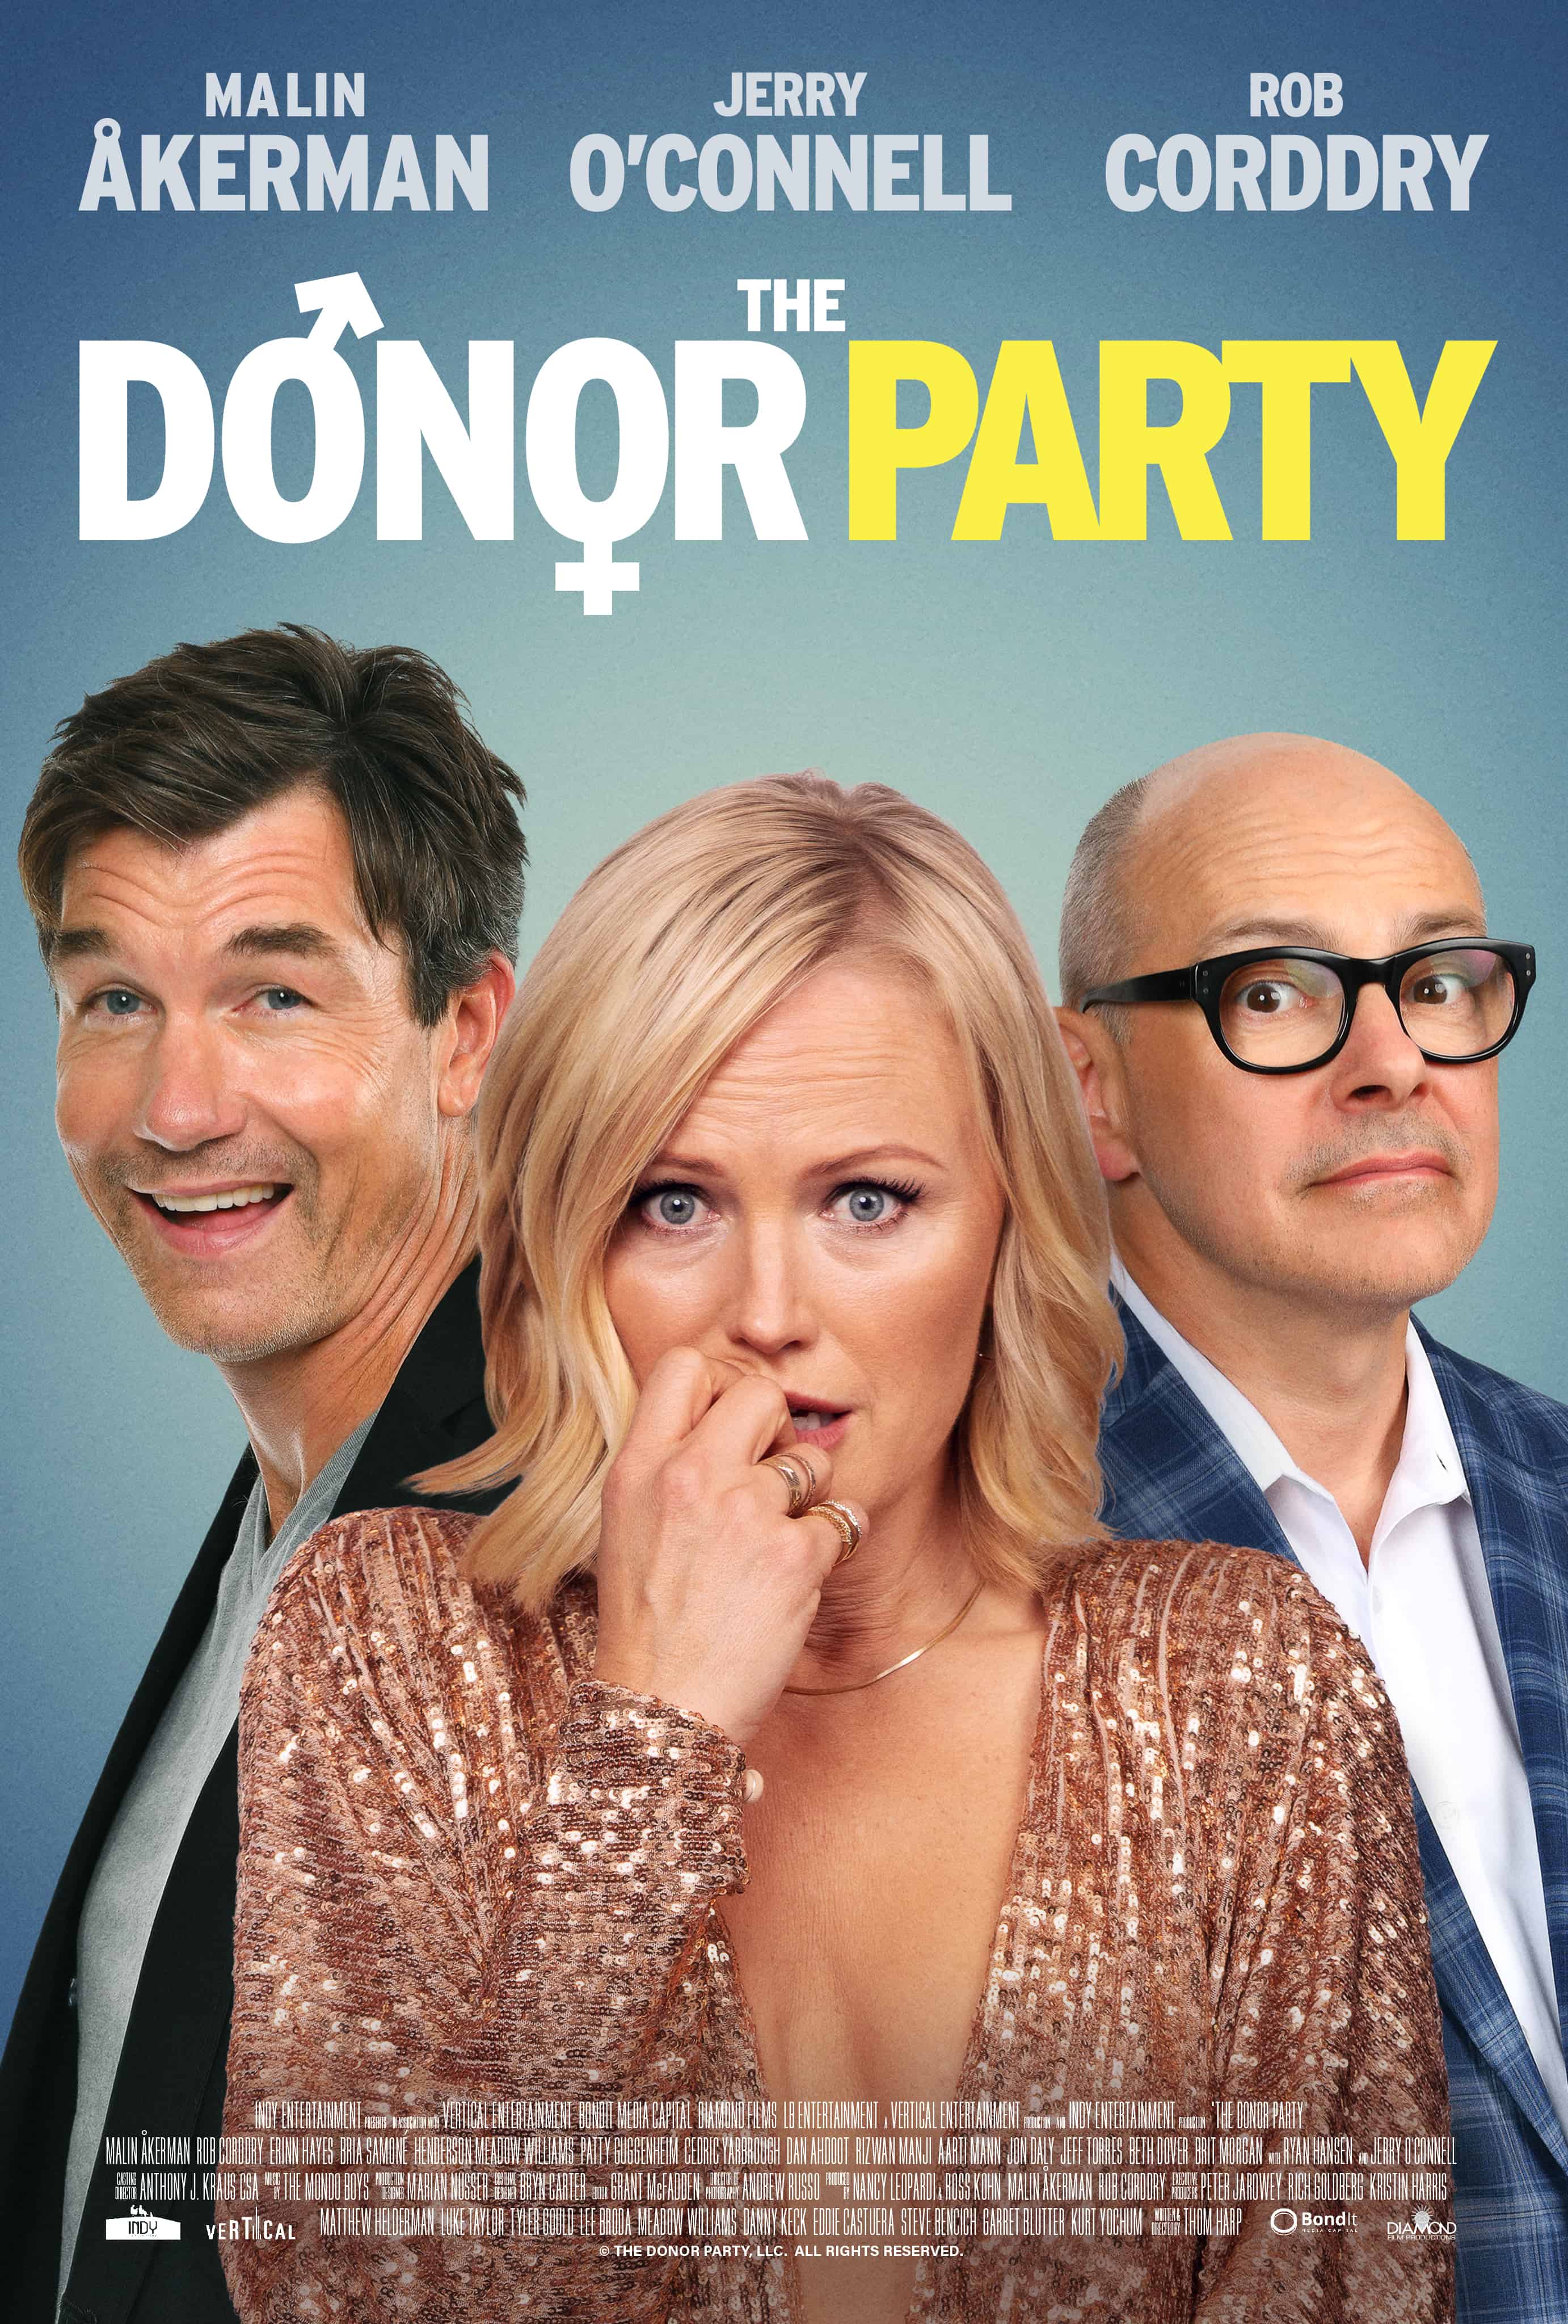 The Donor Party has a new clip! 22